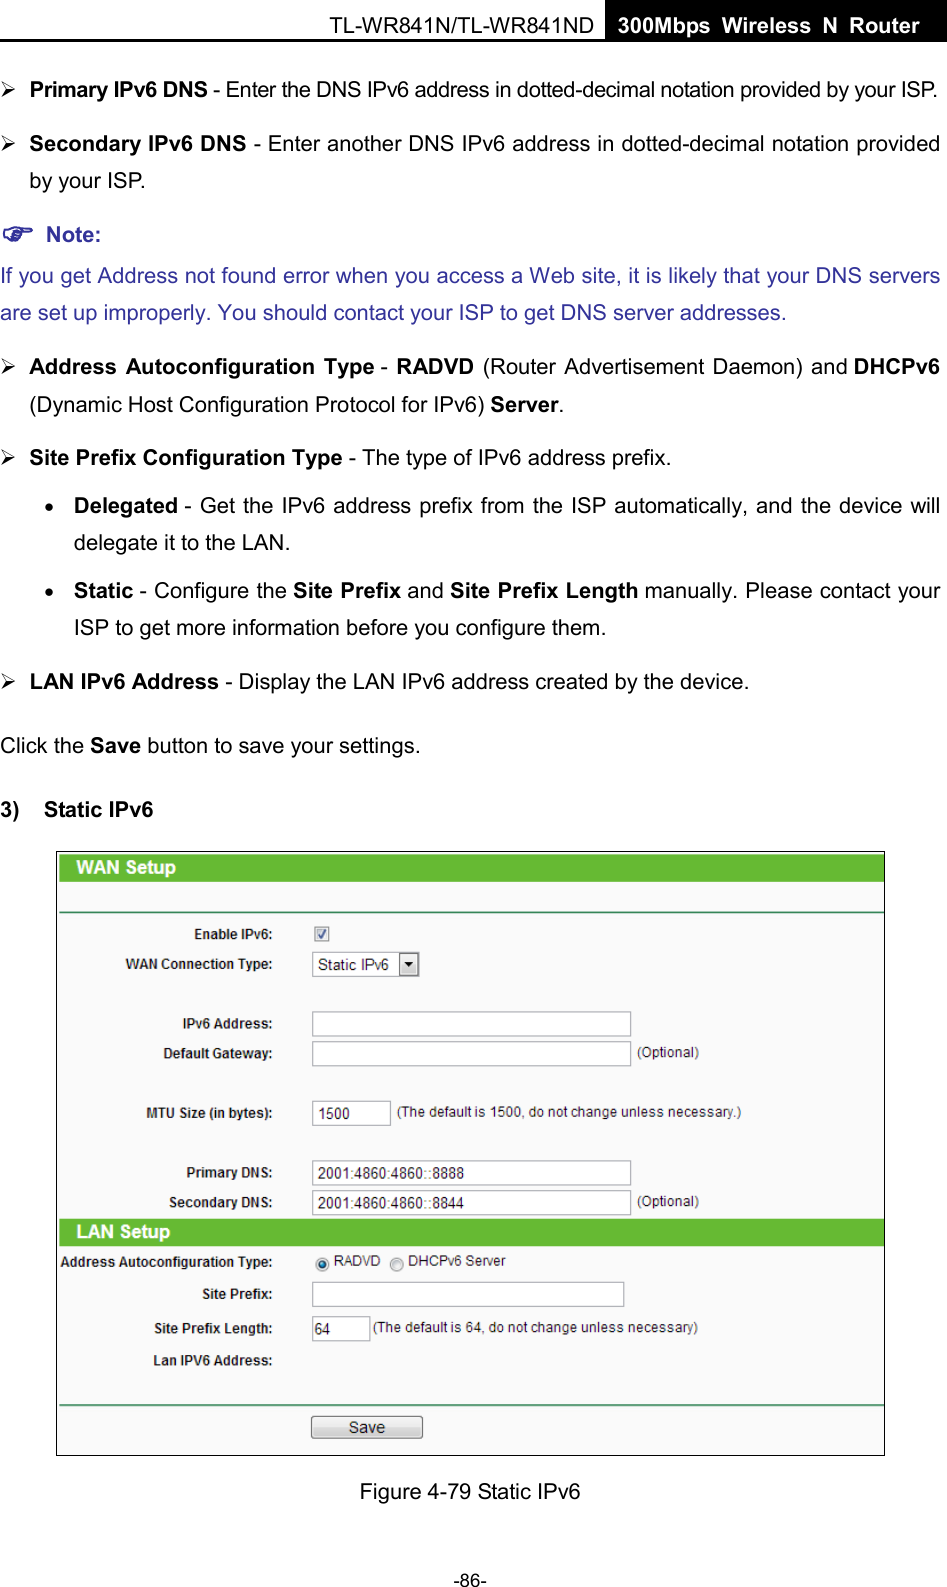  TL-WR841N/TL-WR841ND  300Mbps Wireless N Router     Primary IPv6 DNS - Enter the DNS IPv6 address in dotted-decimal notation provided by your ISP.  Secondary IPv6 DNS - Enter another DNS IPv6 address in dotted-decimal notation provided by your ISP.  Note: If you get Address not found error when you access a Web site, it is likely that your DNS servers are set up improperly. You should contact your ISP to get DNS server addresses.  Address Autoconfiguration Type - RADVD (Router Advertisement Daemon) and DHCPv6 (Dynamic Host Configuration Protocol for IPv6) Server.  Site Prefix Configuration Type - The type of IPv6 address prefix. • Delegated - Get the IPv6 address prefix from the ISP automatically, and the device will delegate it to the LAN. • Static - Configure the Site Prefix and Site Prefix Length manually. Please contact your ISP to get more information before you configure them.  LAN IPv6 Address - Display the LAN IPv6 address created by the device. Click the Save button to save your settings. 3) Static IPv6  Figure 4-79 Static IPv6 -86- 